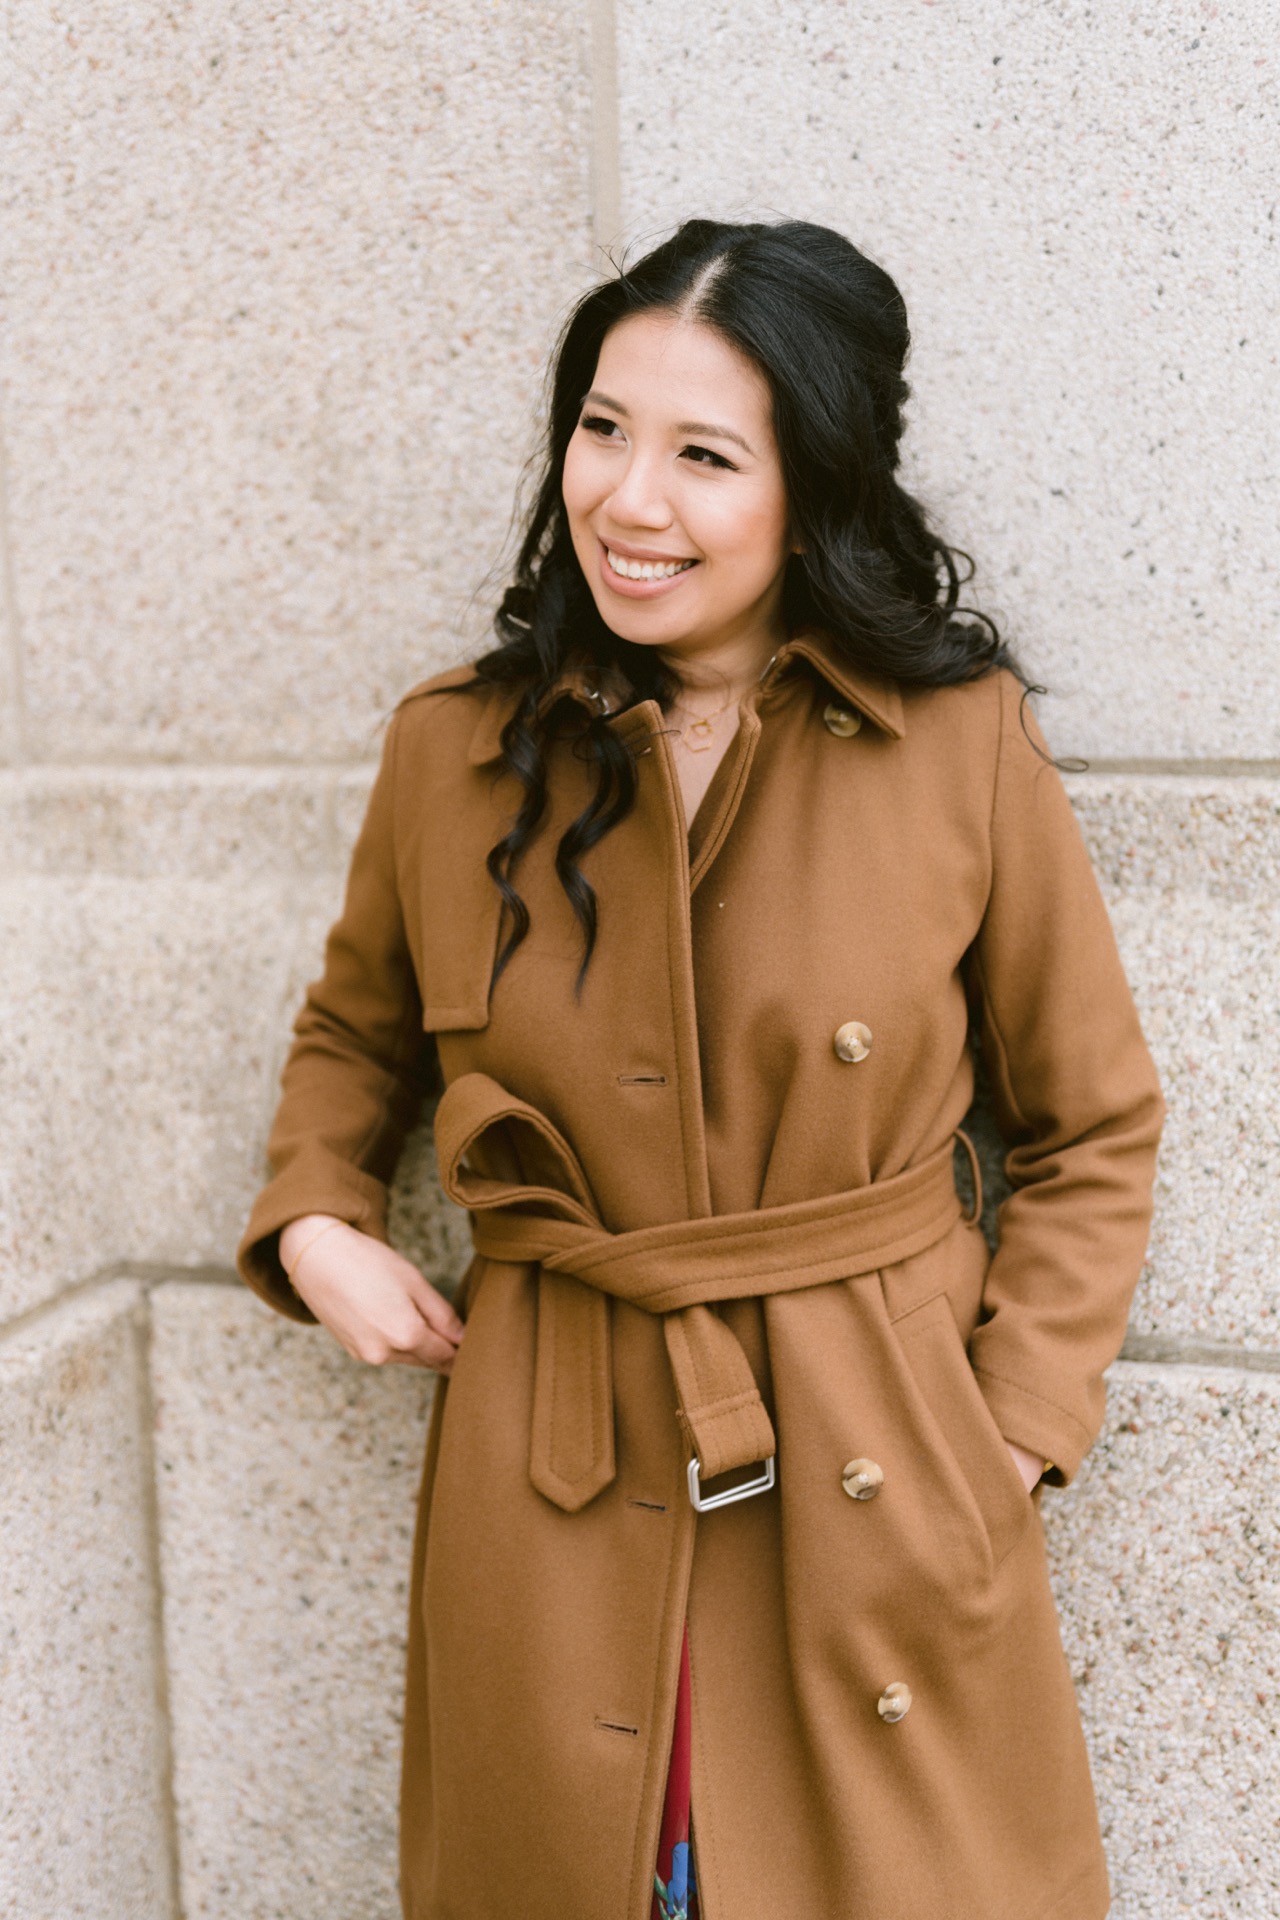 A smiling woman wearing a brown coat standing against a stone wall.